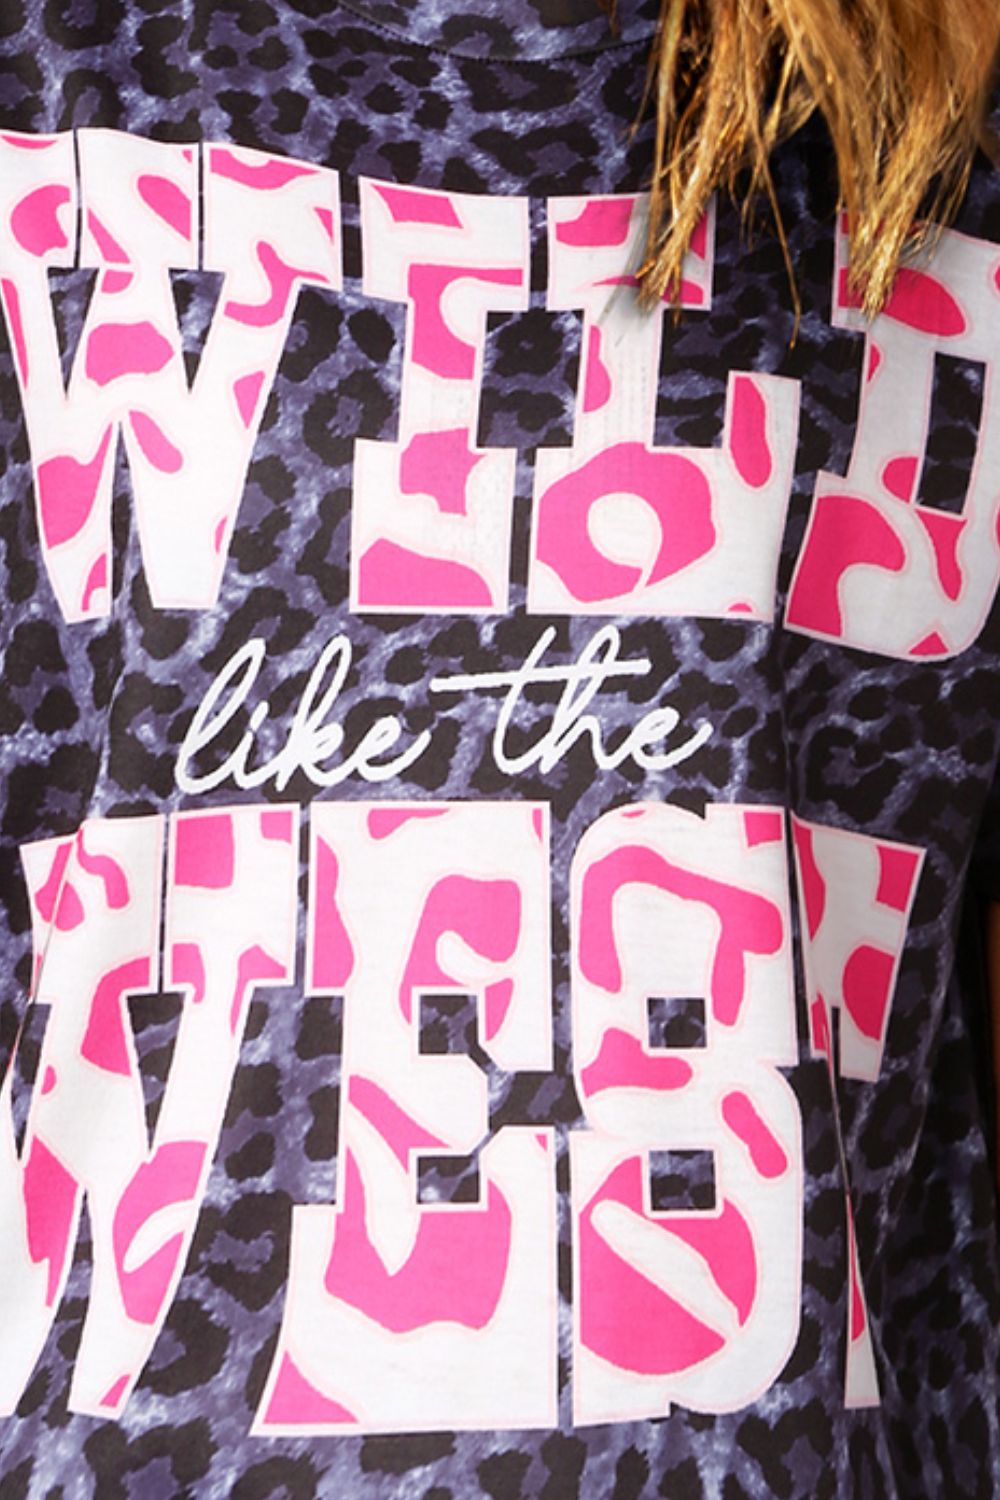 Slogan Graphic Leopard Tee - T-Shirts - FITGGINS